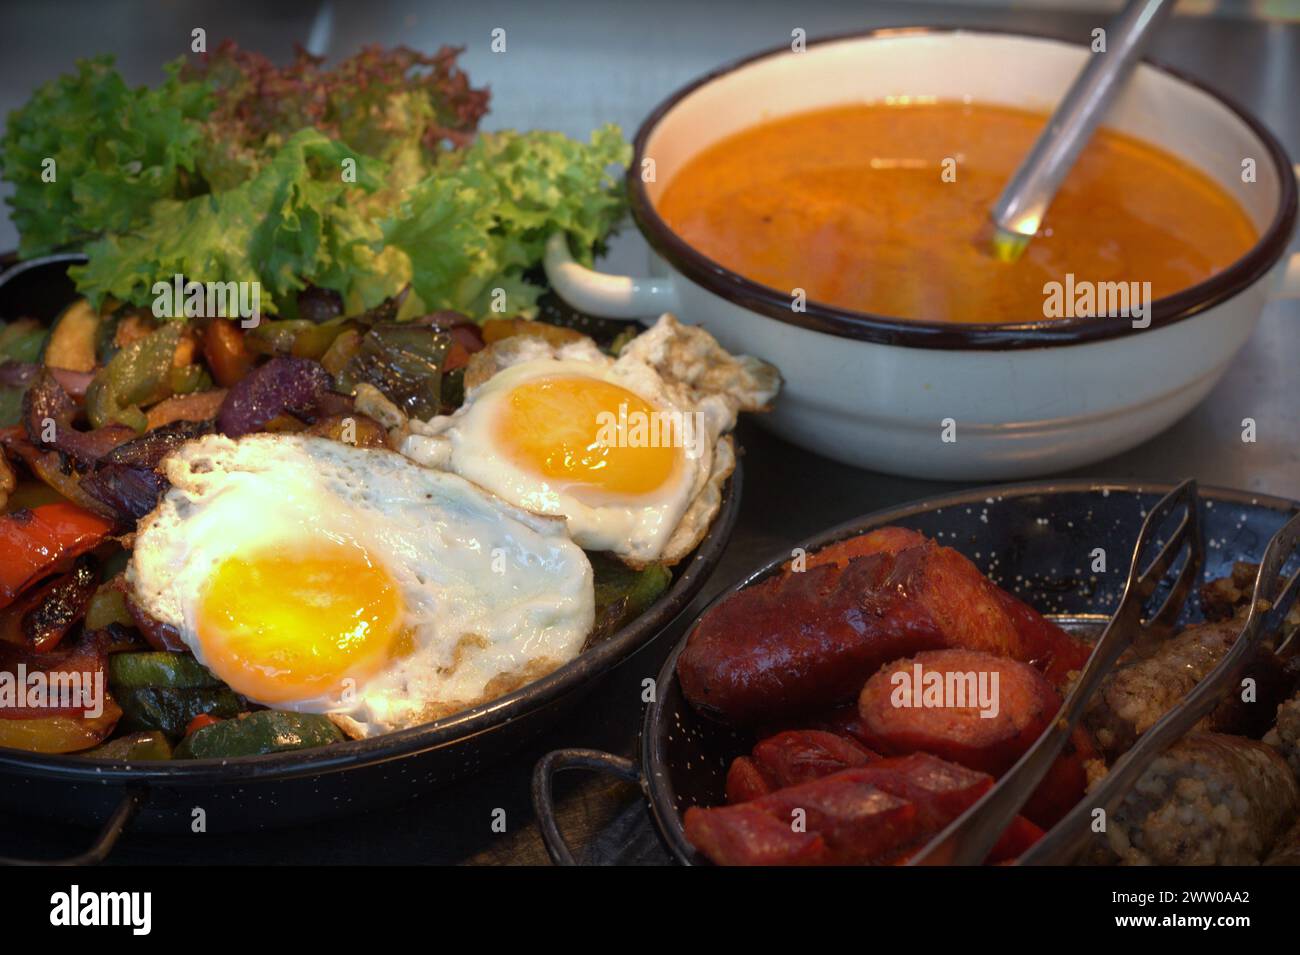 Healthy diet - stewed veggies and fried eggs nicely arranged on a table Stock Photo